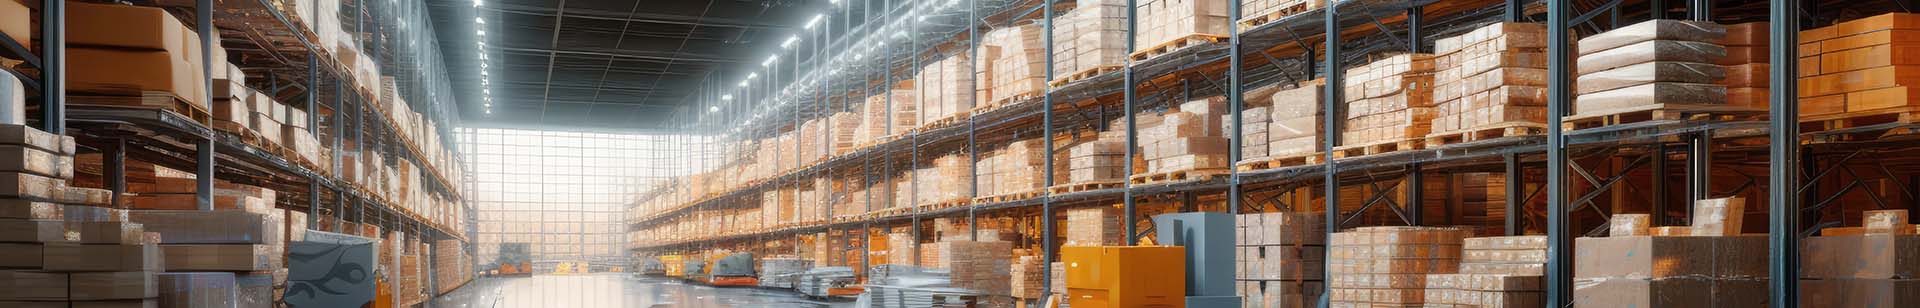 The logistics warehouse of the future. Bright large room with shelving